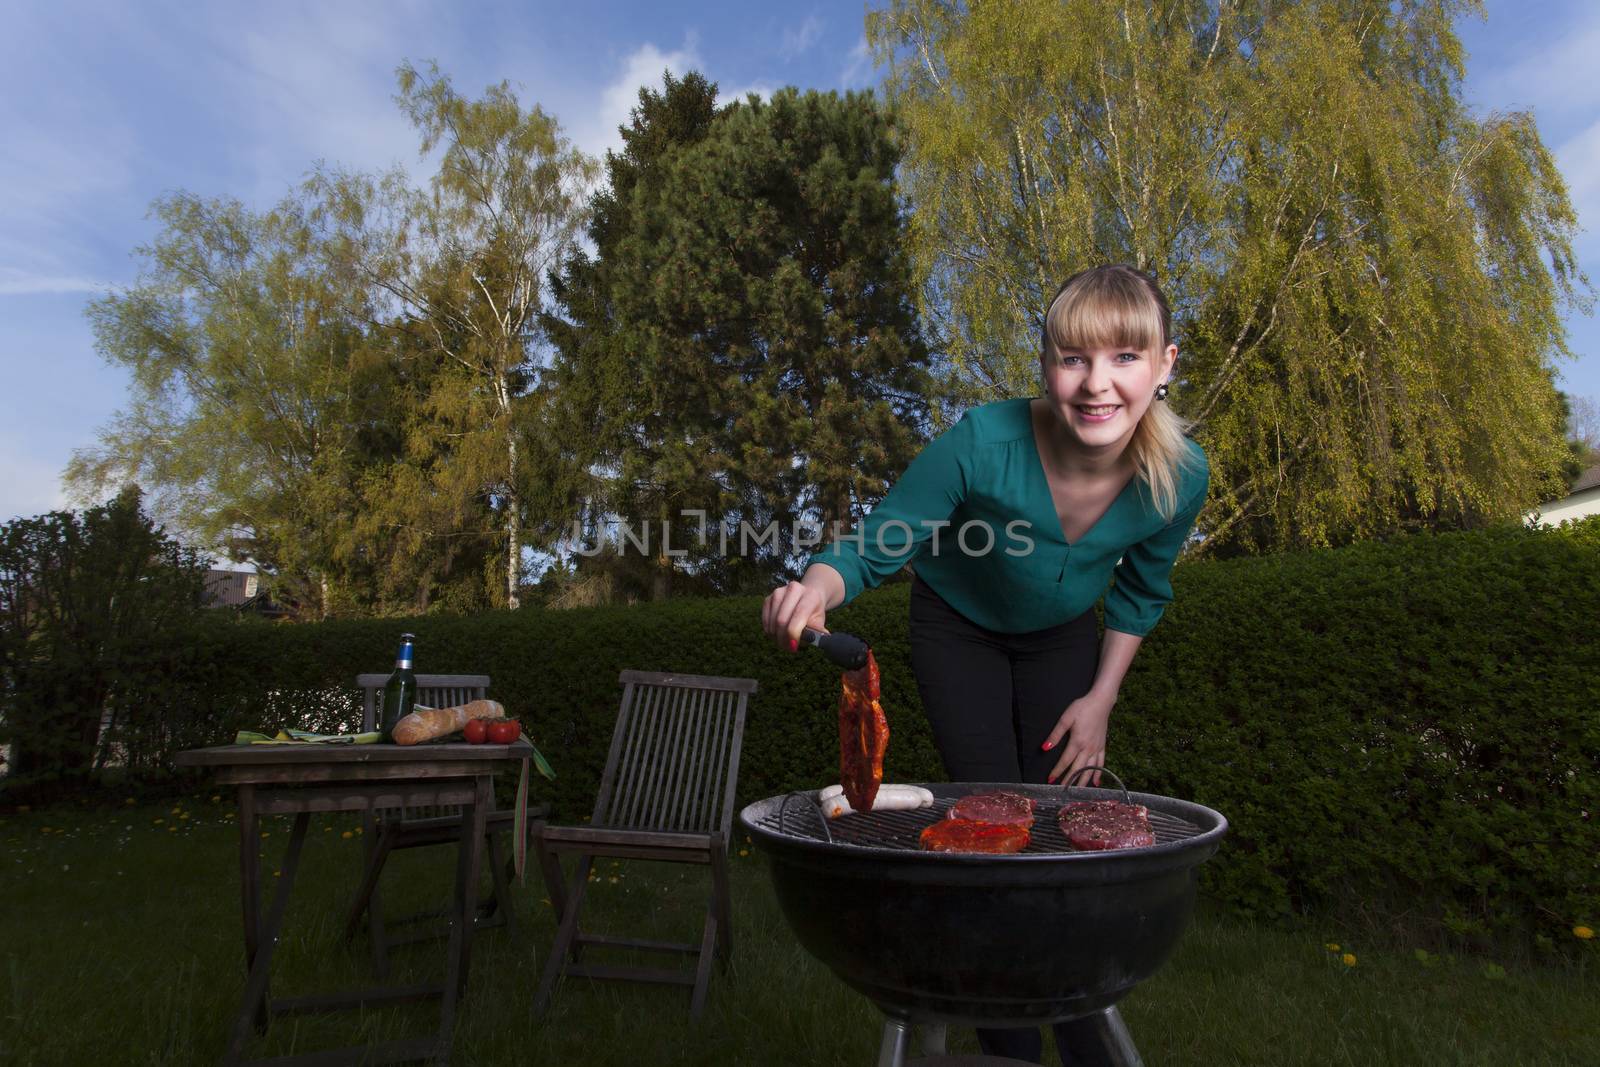 woman and a barbecue